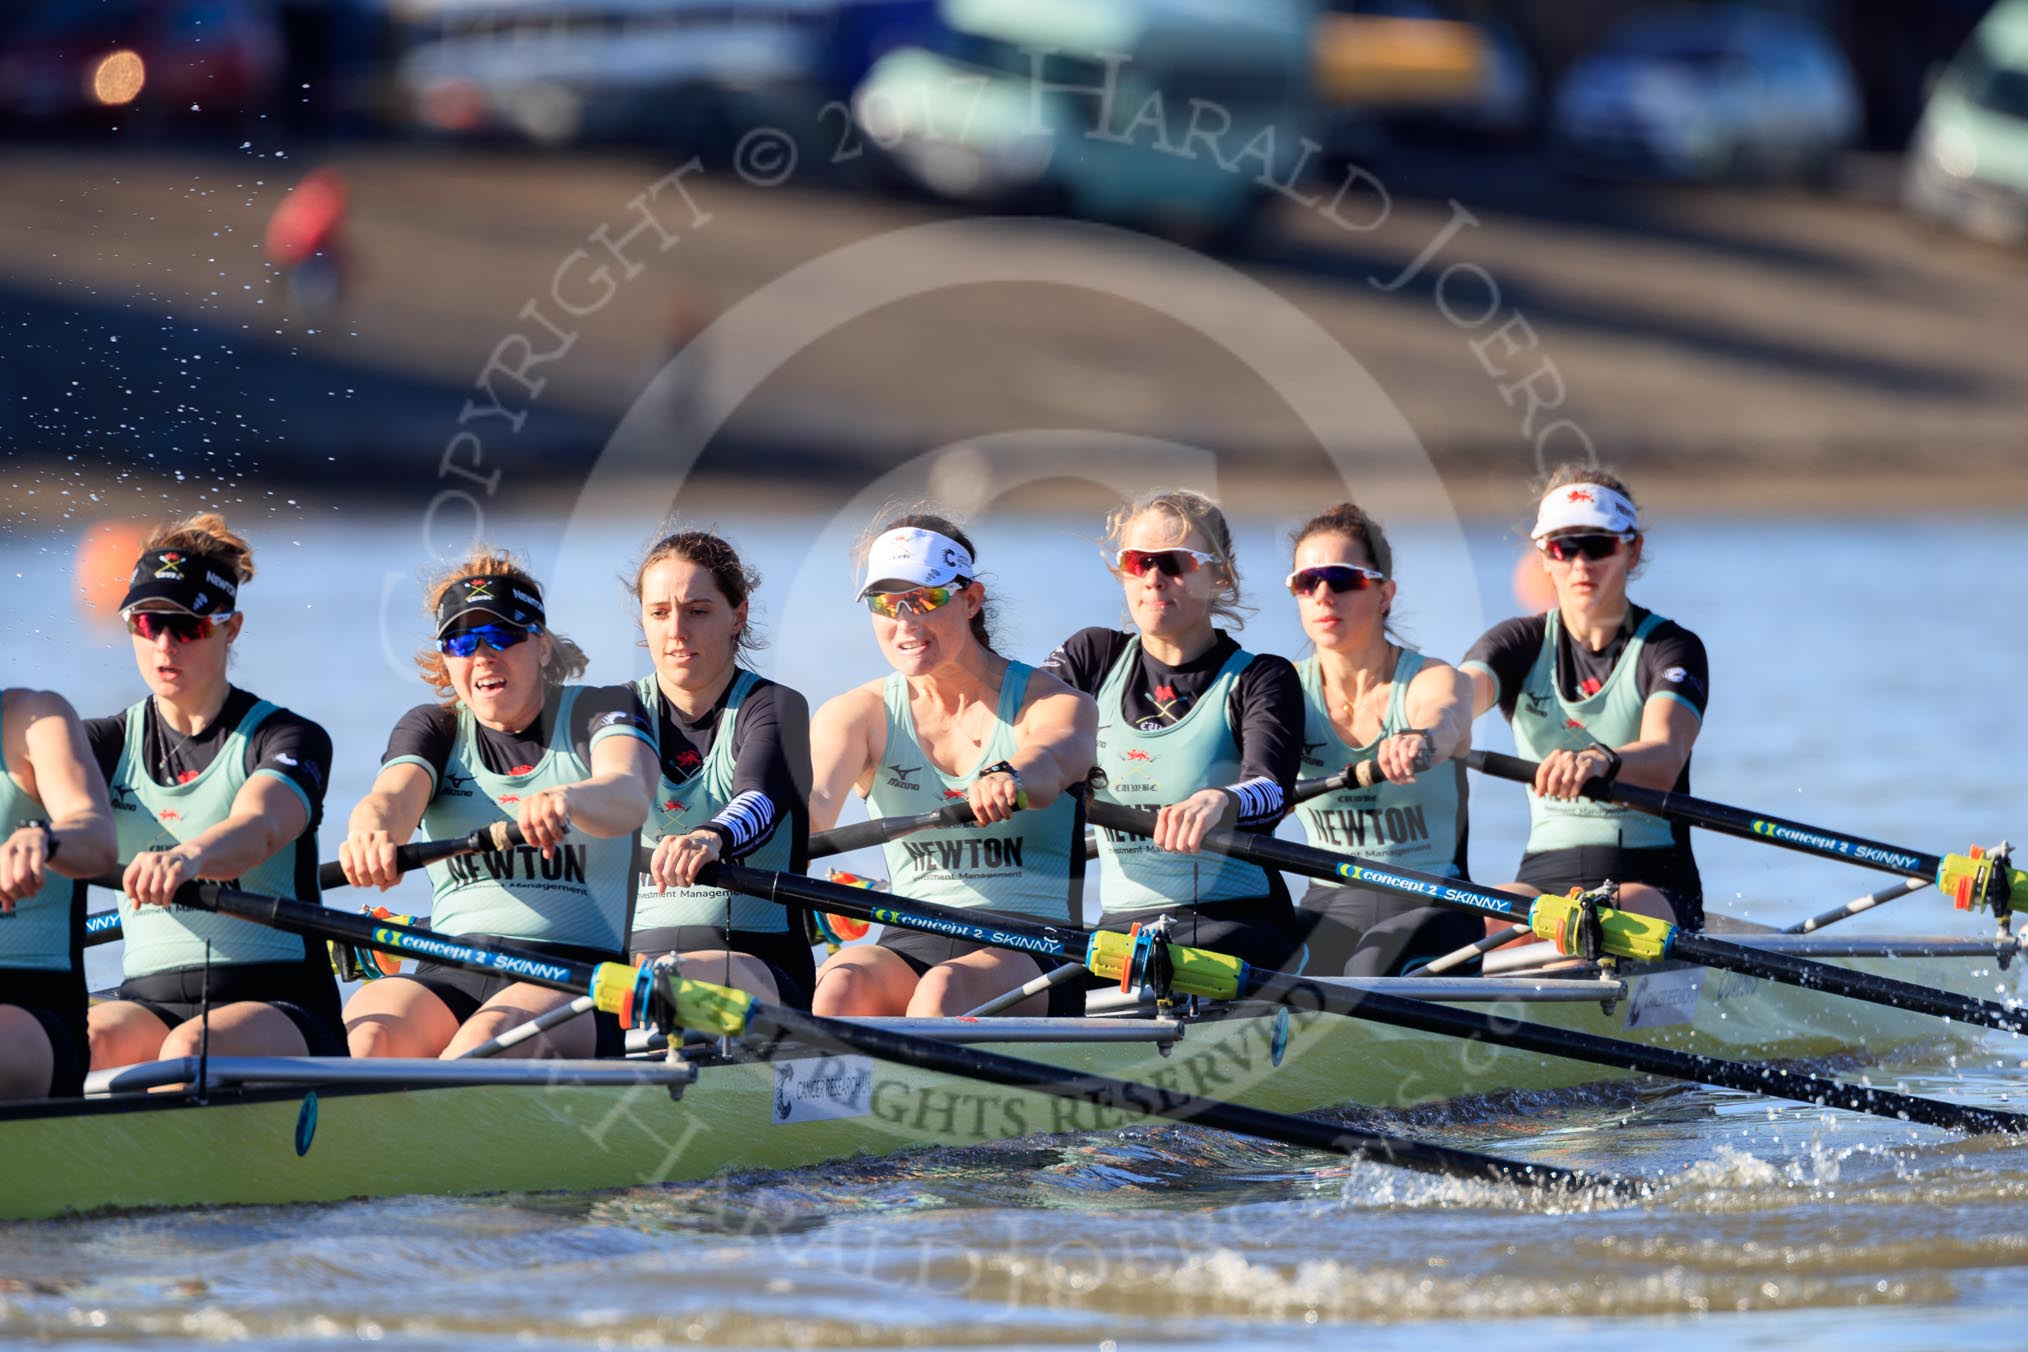 The Women's Boat Race season 2018 - fixture CUWBC vs. ULBC: The race has been started - OUWBC with  stroke Tricia Smith, 7 Imogen Grant, 6 Anne Beenken, 5 Thea Zabell, 4 Paula Wesselmann, 3 Alice White, 2 Myriam Goudet-Boukhatmi, bow Olivia Coffey.
River Thames between Putney Bridge and Mortlake,
London SW15,

United Kingdom,
on 17 February 2018 at 13:09, image #47